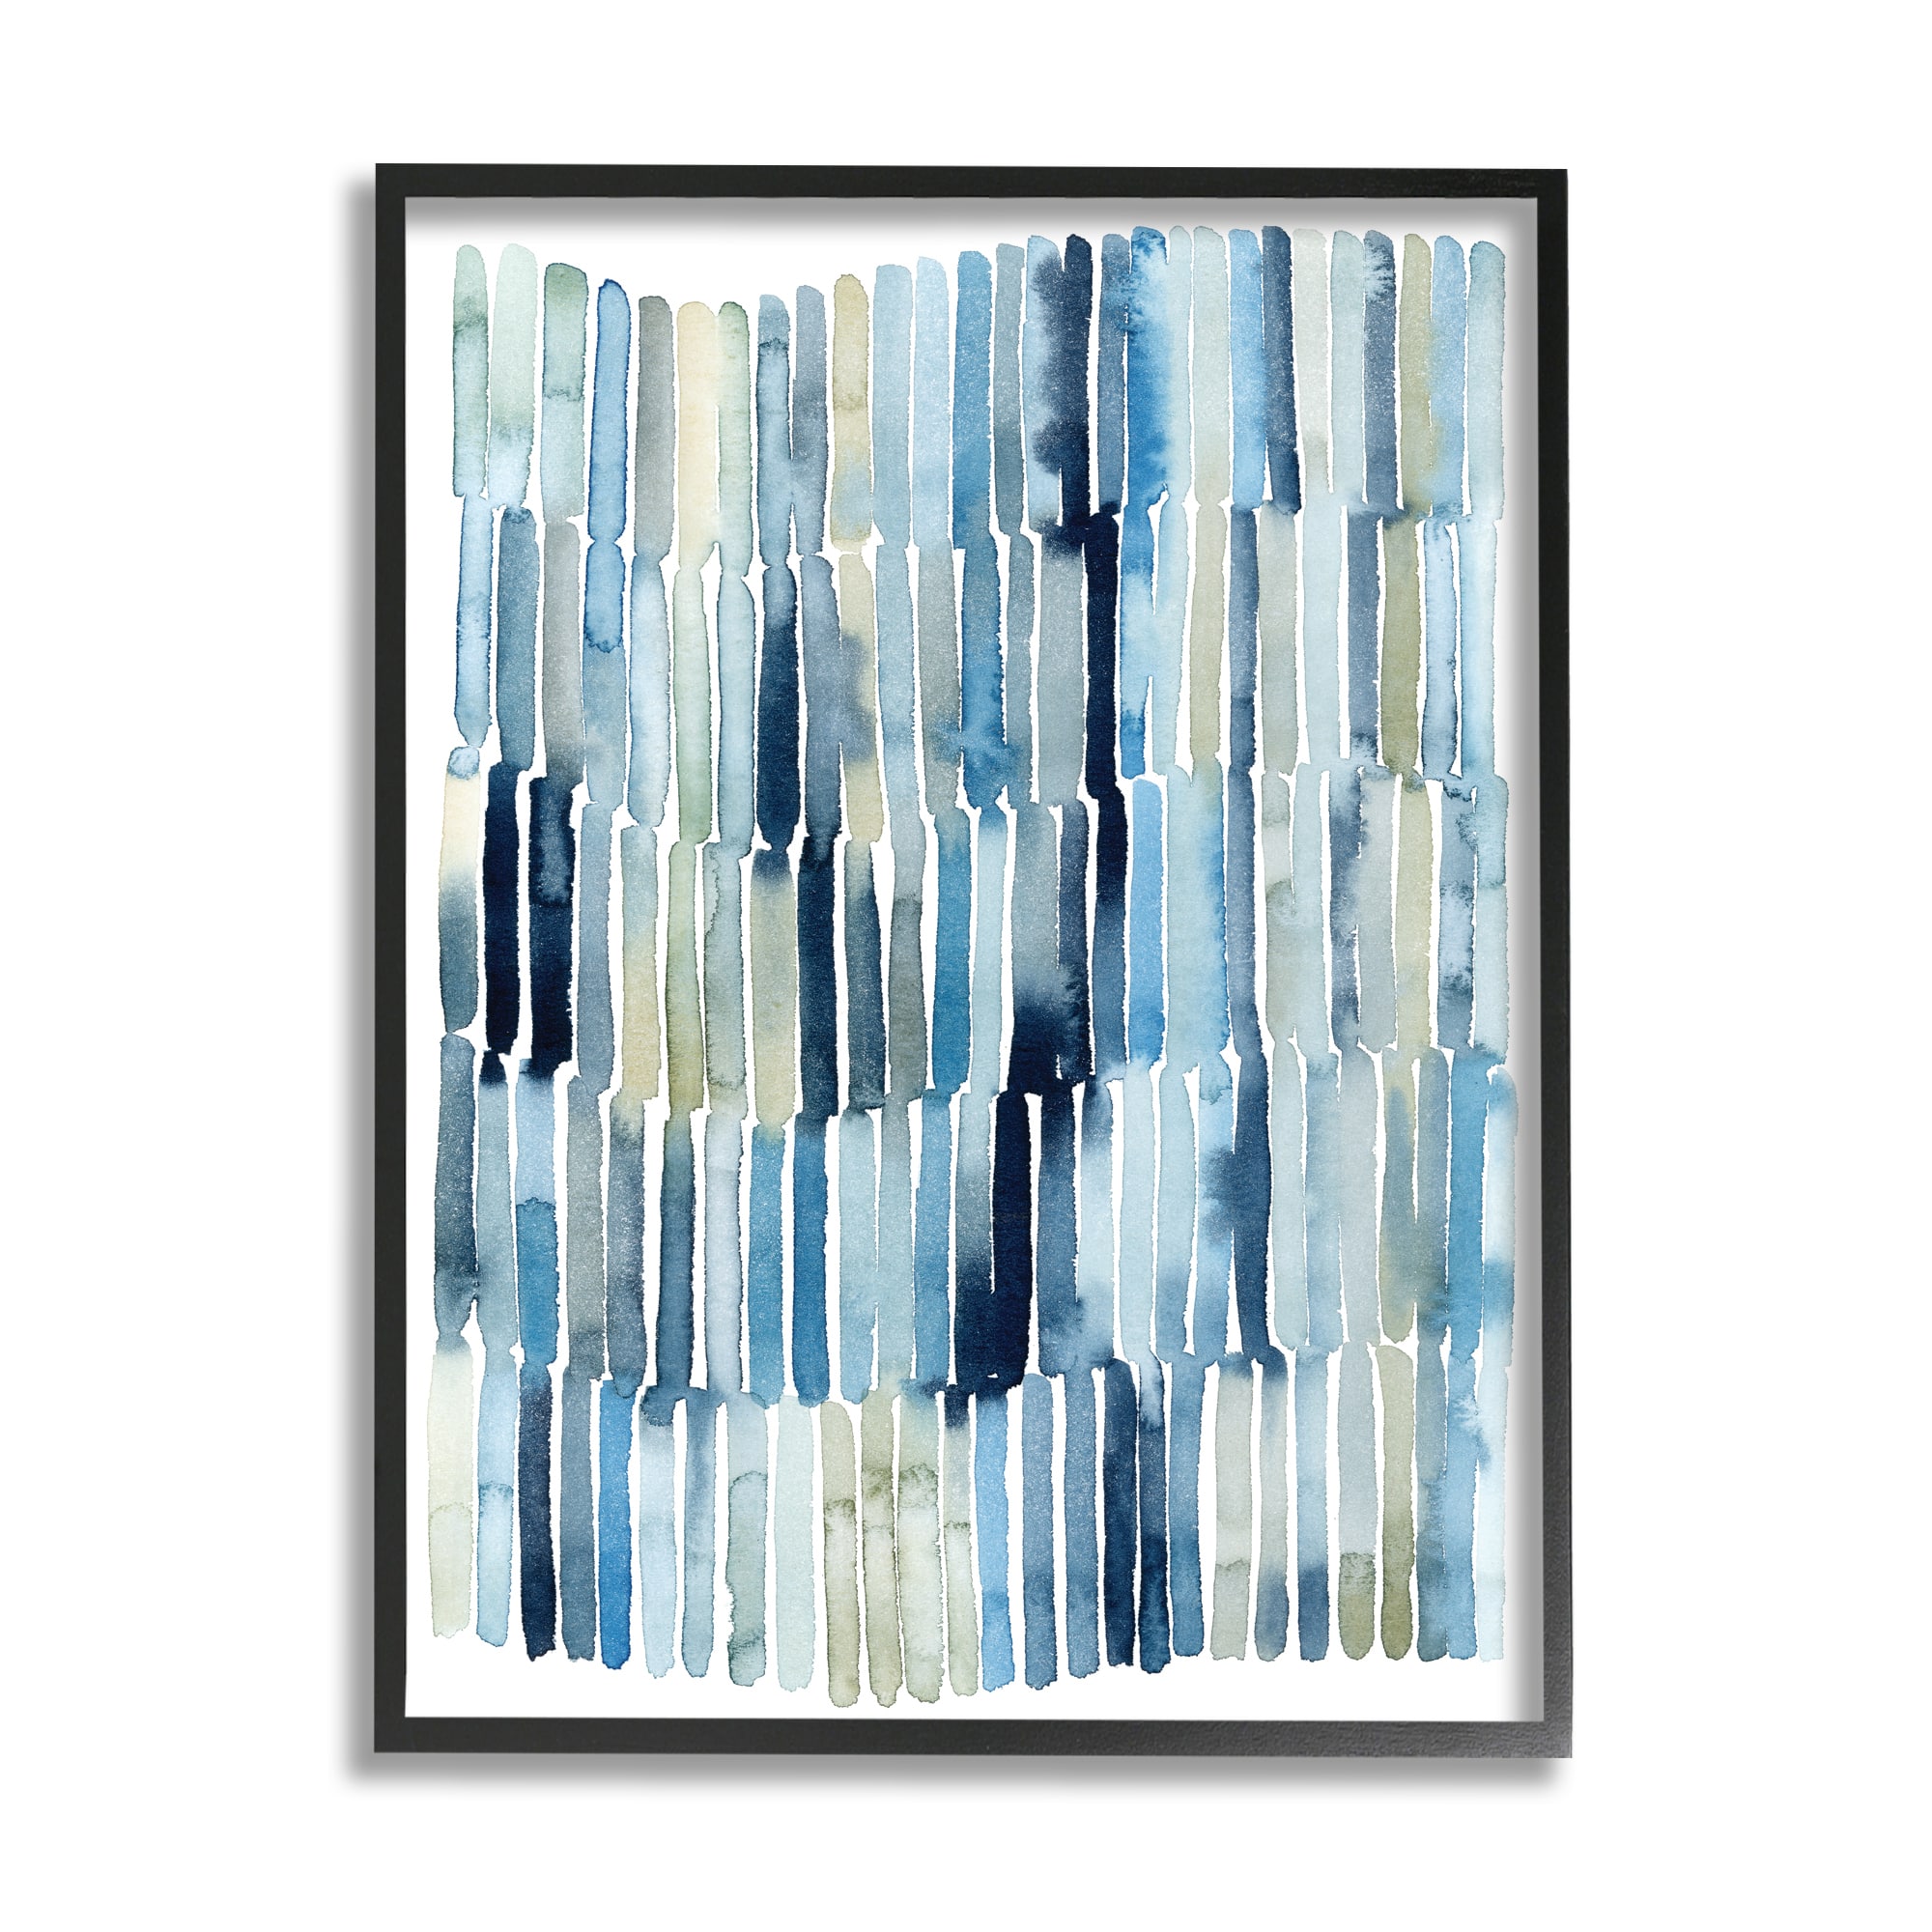 Stupell Industries Nautical Inspired Abstraction Blue Beige Blocked Lines in Black Frame Wall Art